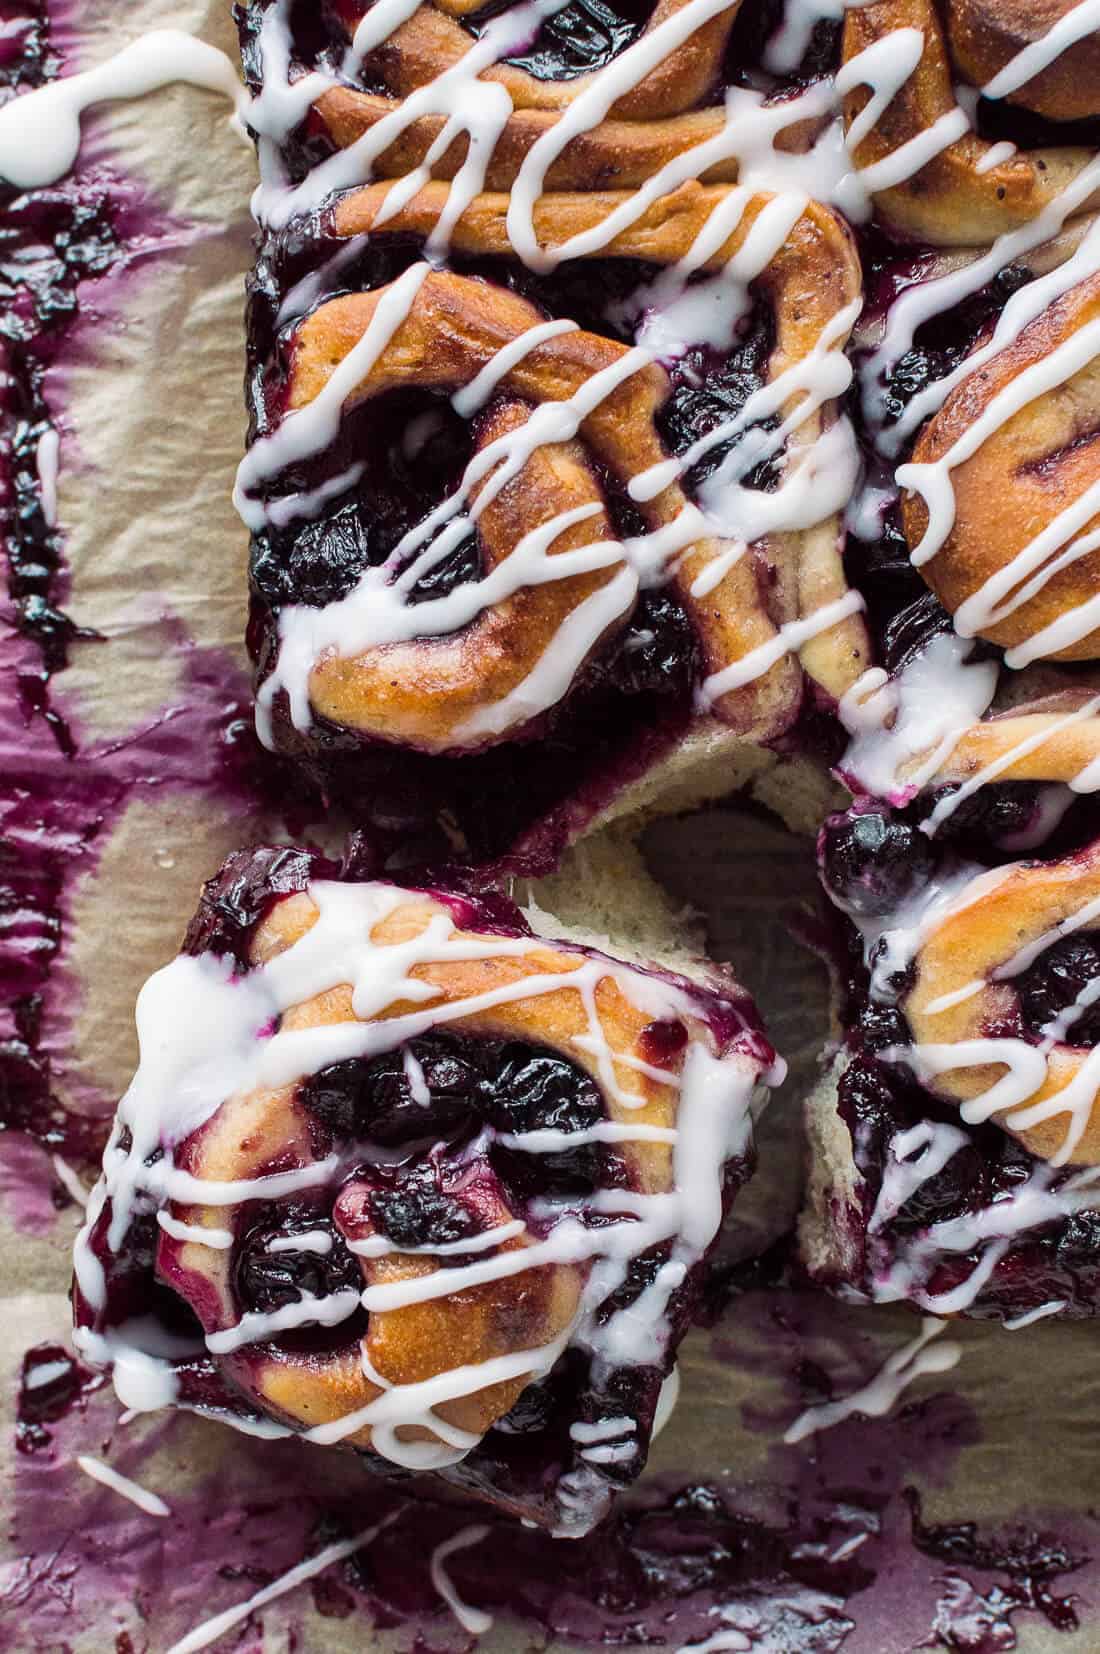 Vegan lemon blueberry rolls - soft, sticky vegan sweet rolls filled with juicy blueberries and topped with a tangy lemon glaze. With step by step photos! #vegan #cinnamonrolls #sweetrolls #blueberries #bread #baking #lemon #dairyfree